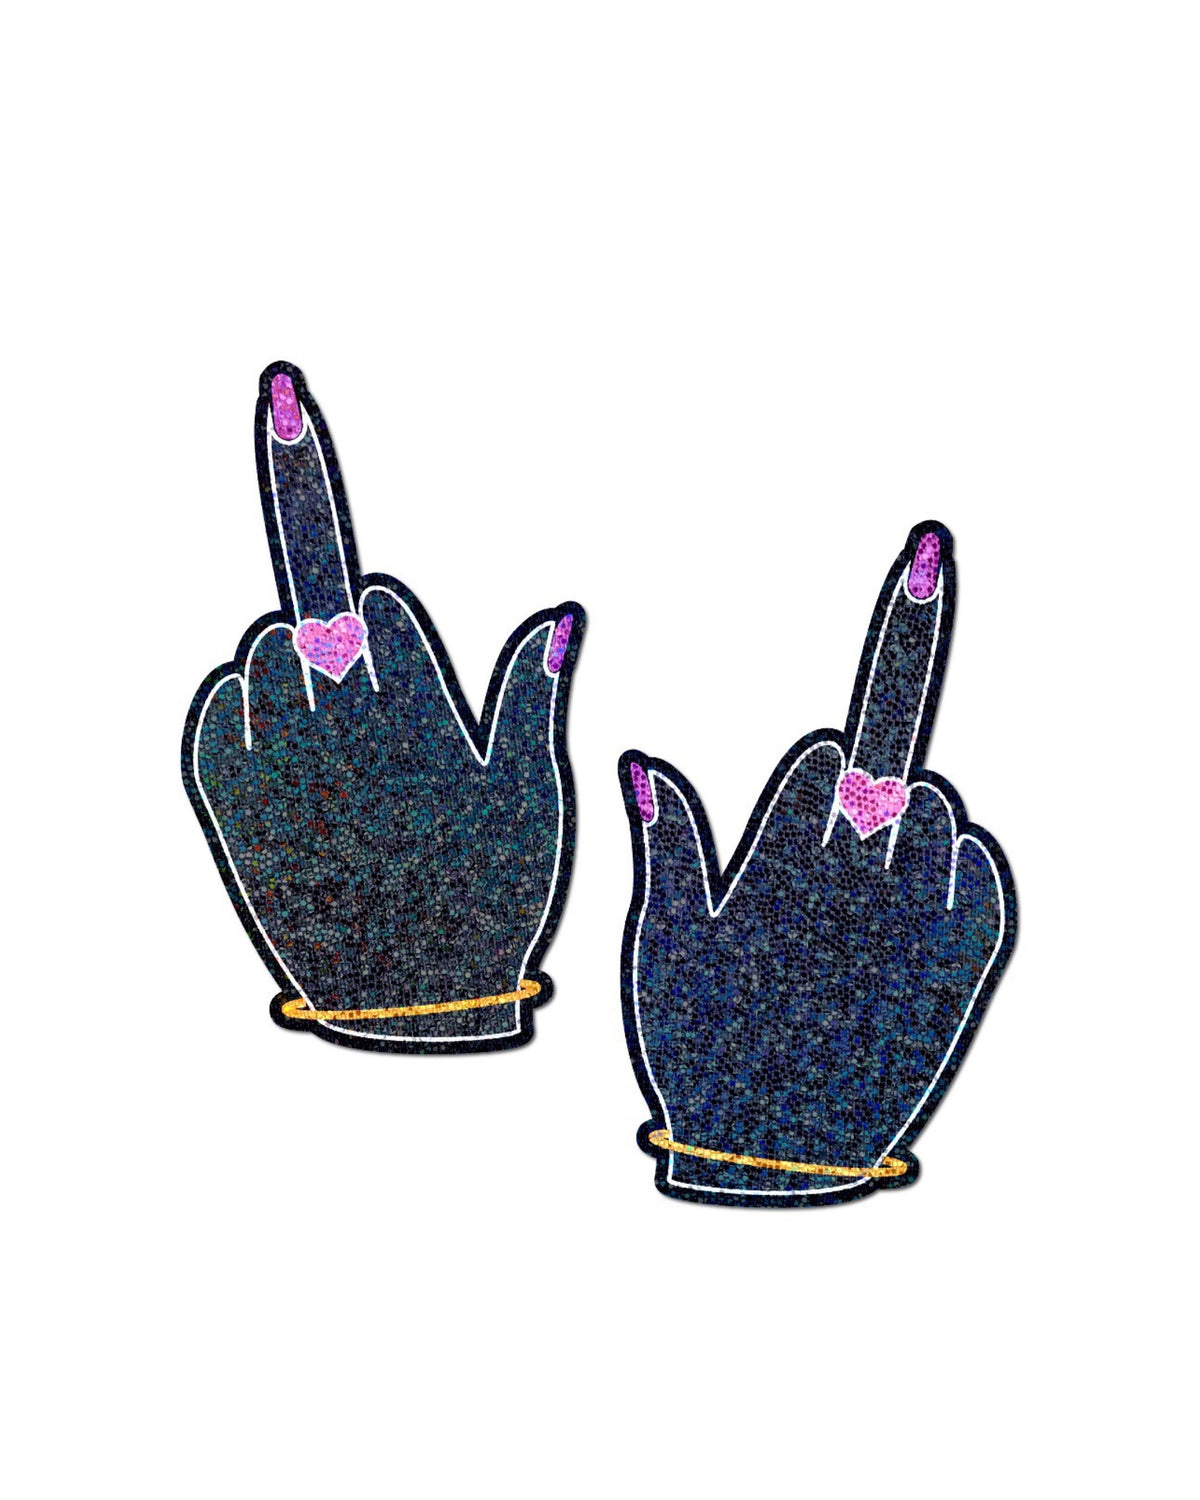 Middle Finger Pasties: Glittering F*ck You Lady Hands Nipple Covers